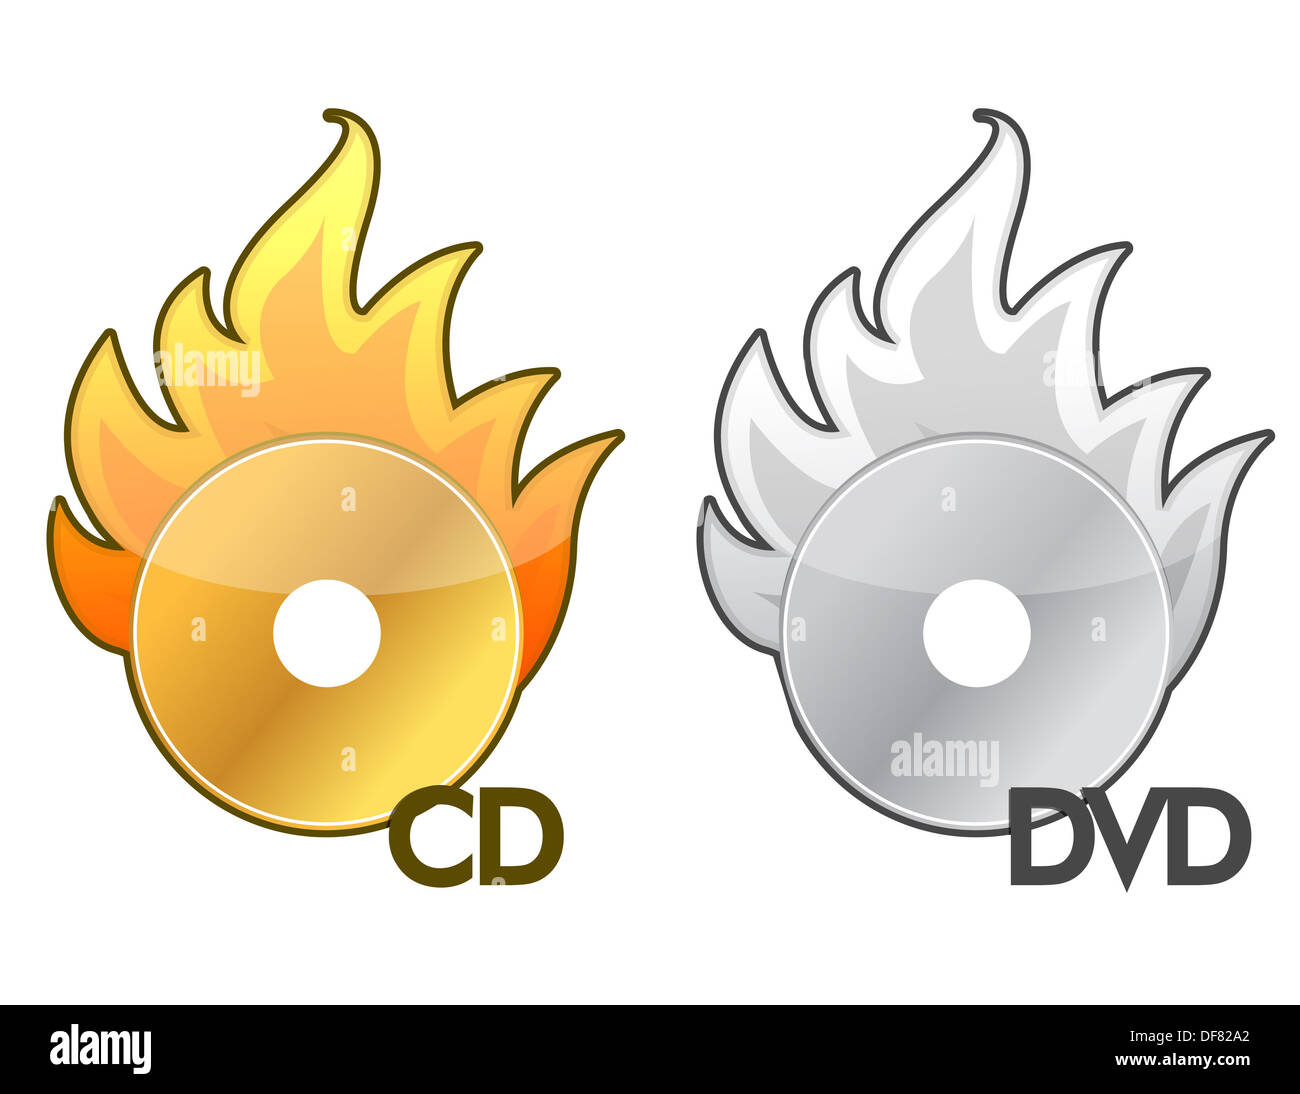 Burning CD / DVD icon over a white background Stock Photo